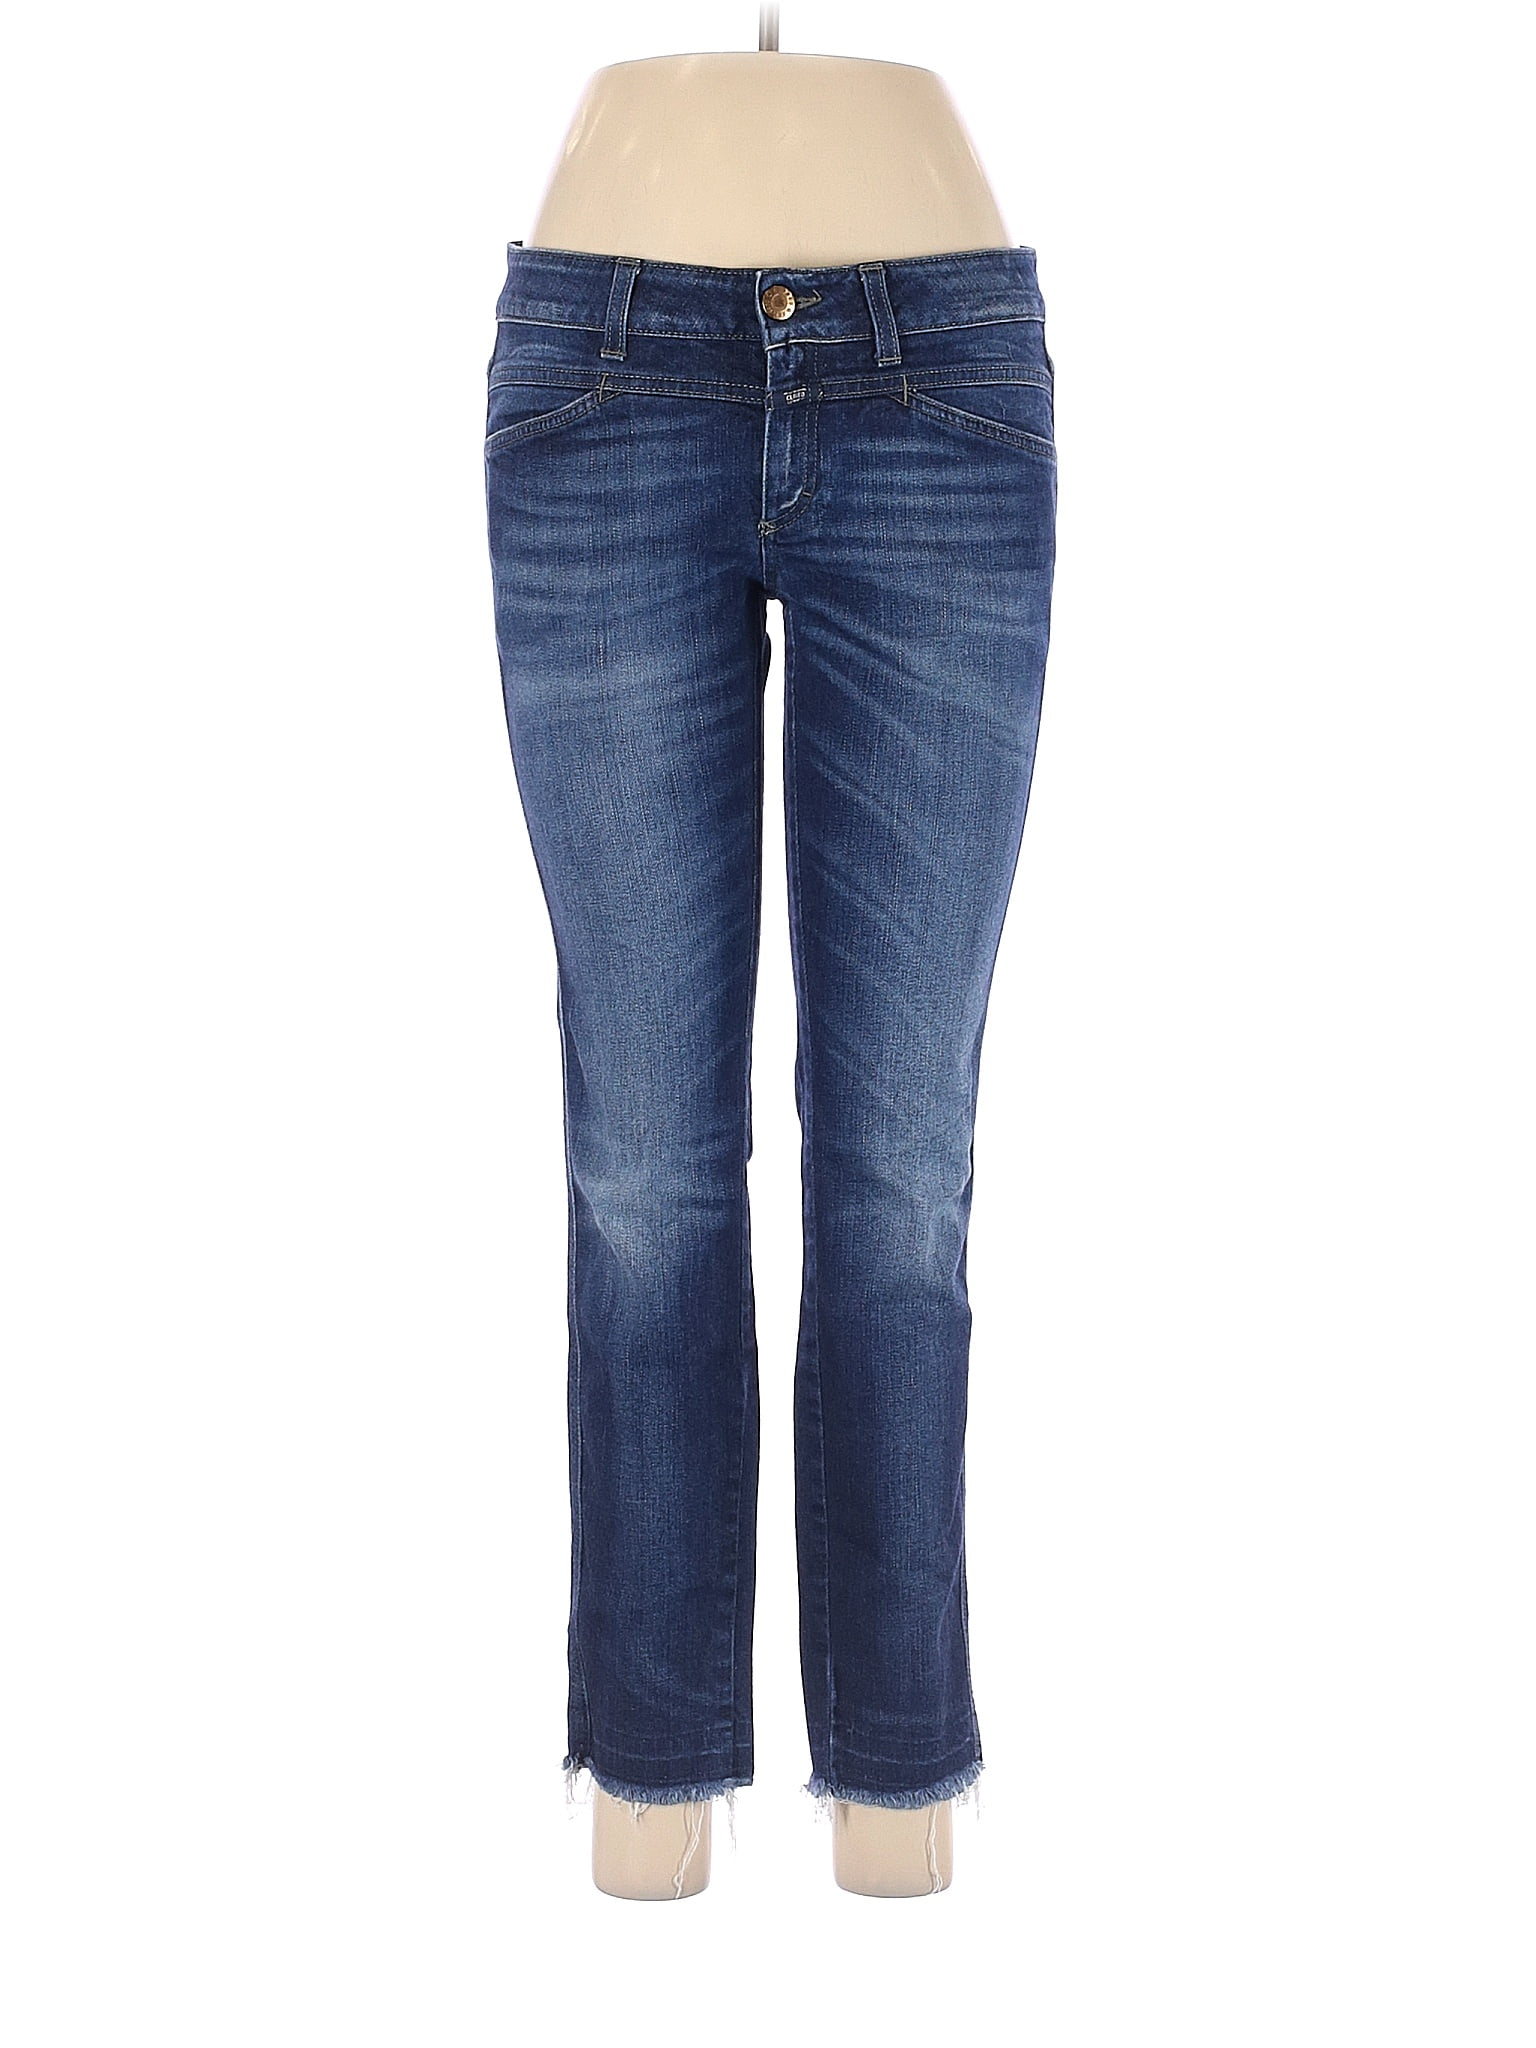 Closed Solid Blue Jeans 81% off thredUP 28 Waist | 